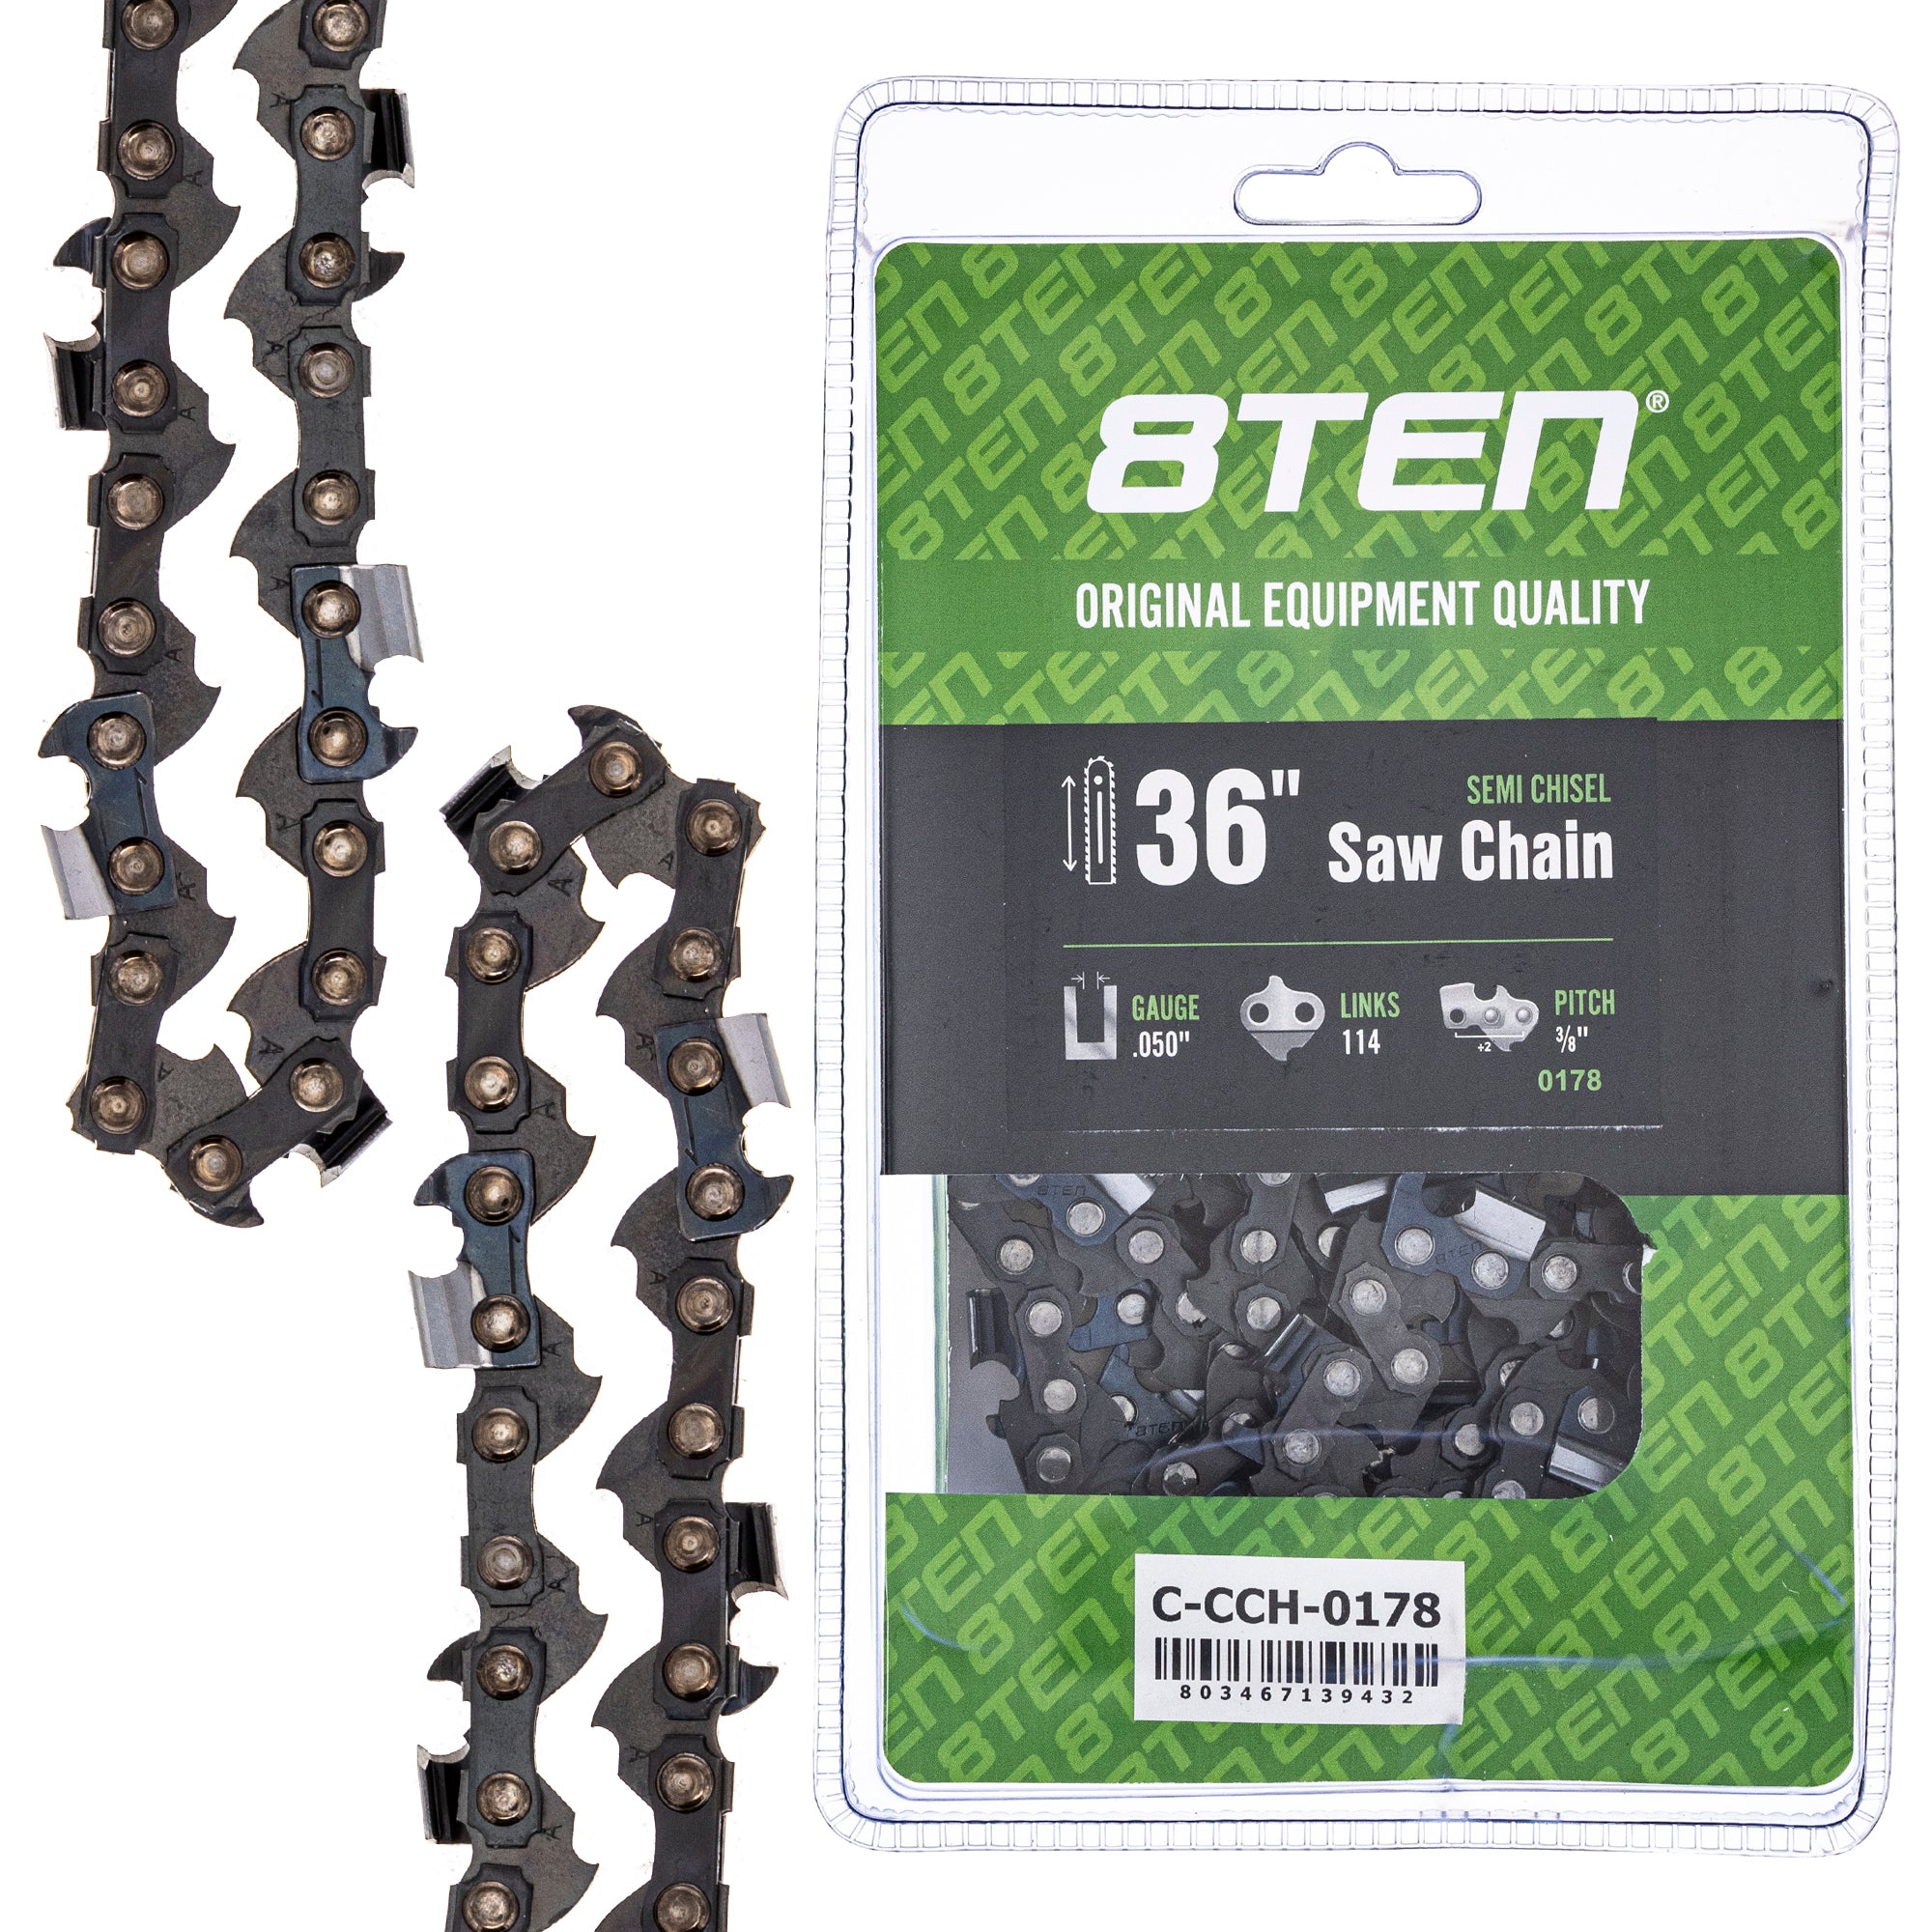 Chainsaw Chain 36 Inch .050 3/8 114DL for zOTHER MS 36 088 066 8TEN 810-CCC2390H